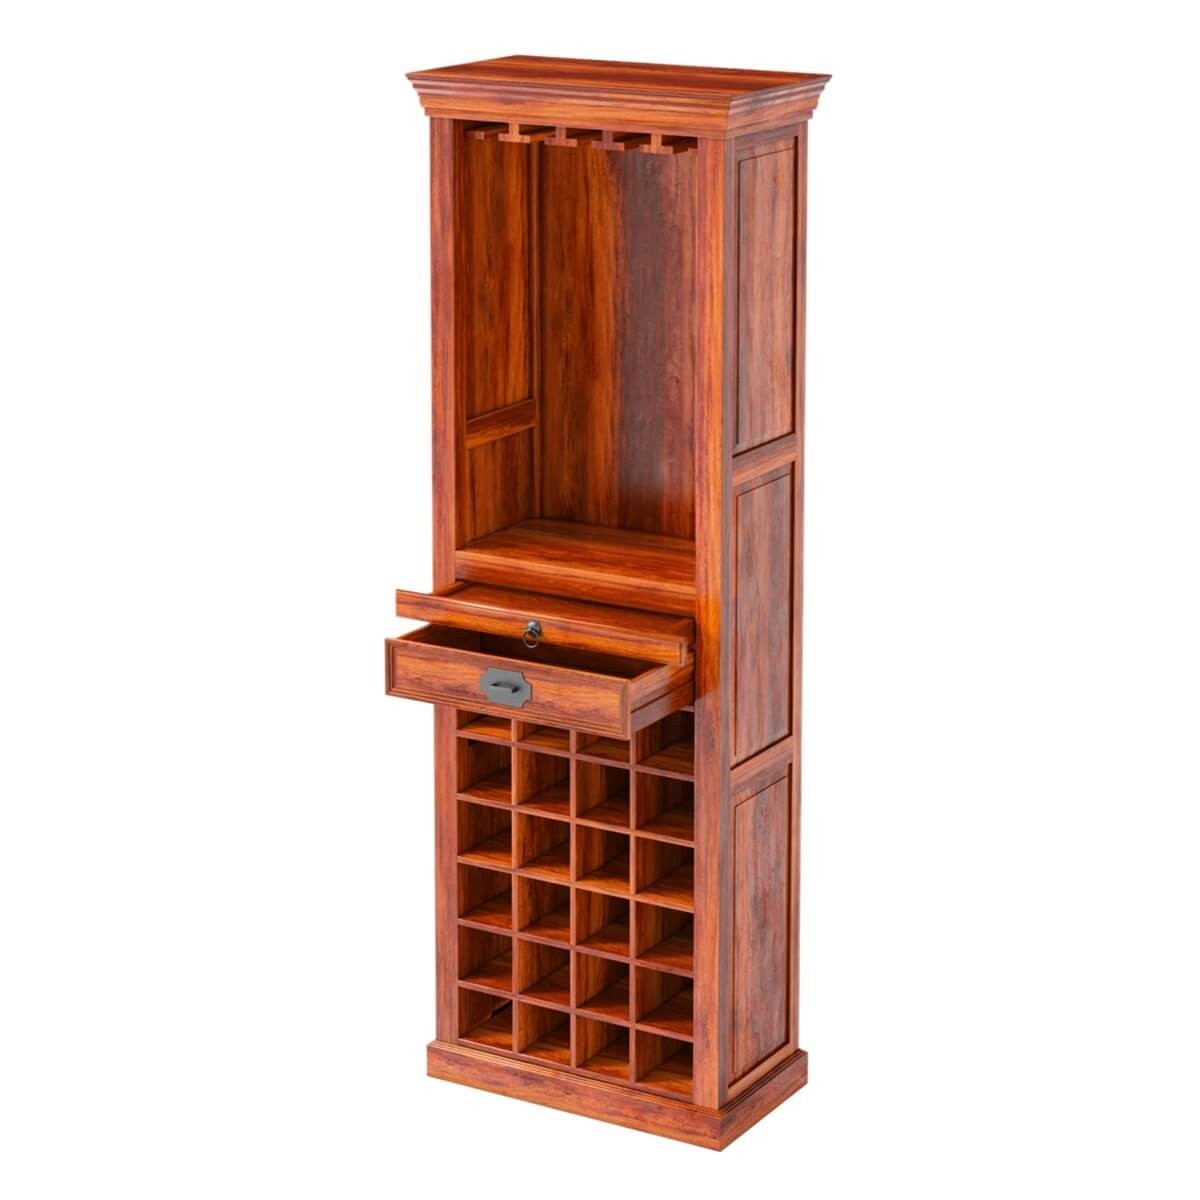 Lovedale rustic tall narrow liquor display cabinet with 1